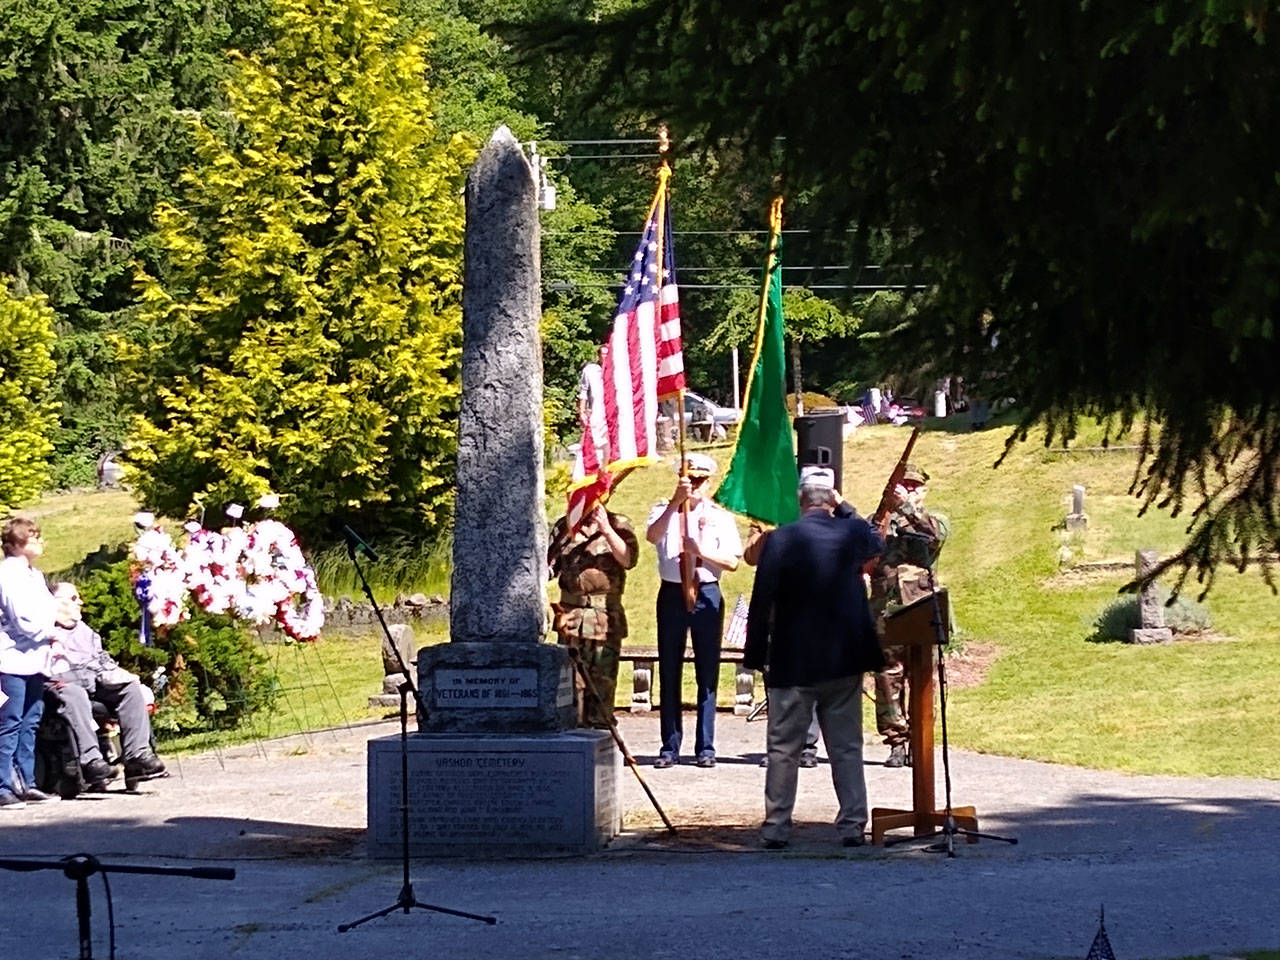 The War Memorial behind the day’s speakers at Vashon Cemetary has stood for a century, commemorating those who have died in conflicts dating back to 1861 (Paul Rowley Photo).